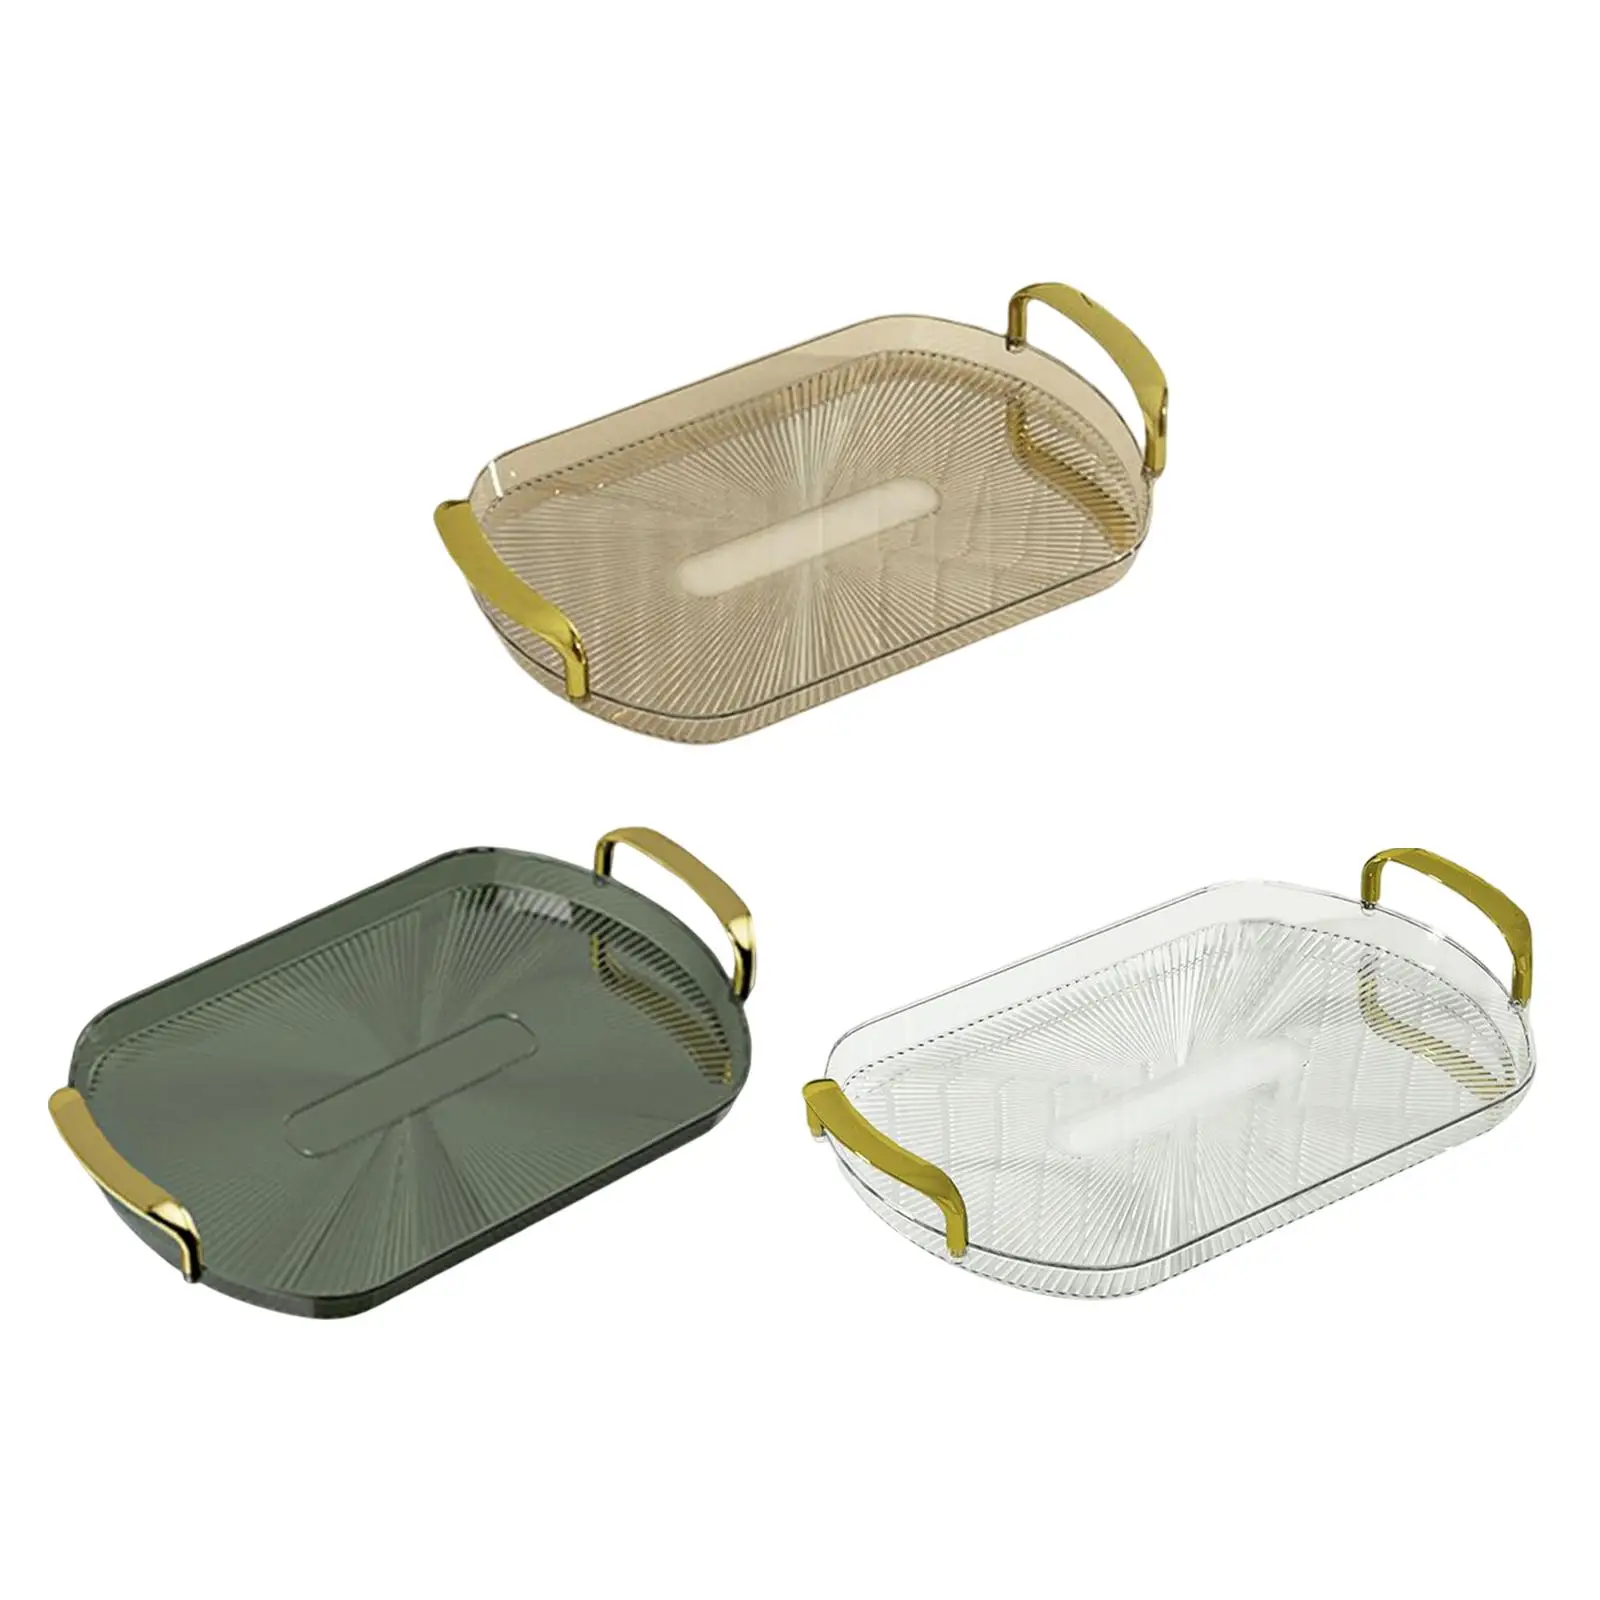 Multipurpose Serving Tray Counter Organizer with Double Handles for Tabletop